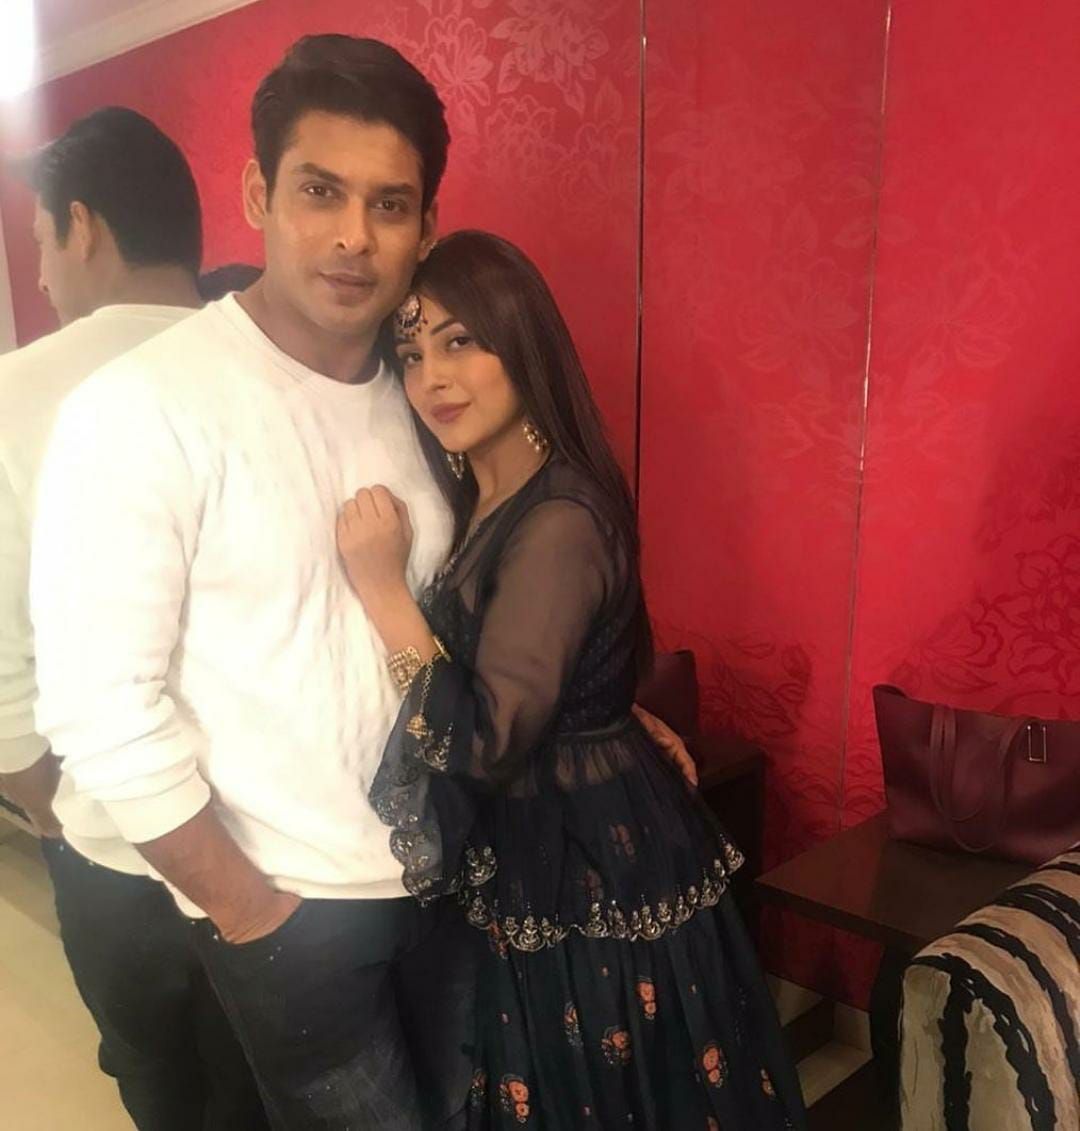 Watch: Shehnaaz Gill, Sidharth Shukla Rehearse For A Romantic Dance Performance; Share Adorable BTS Pictures